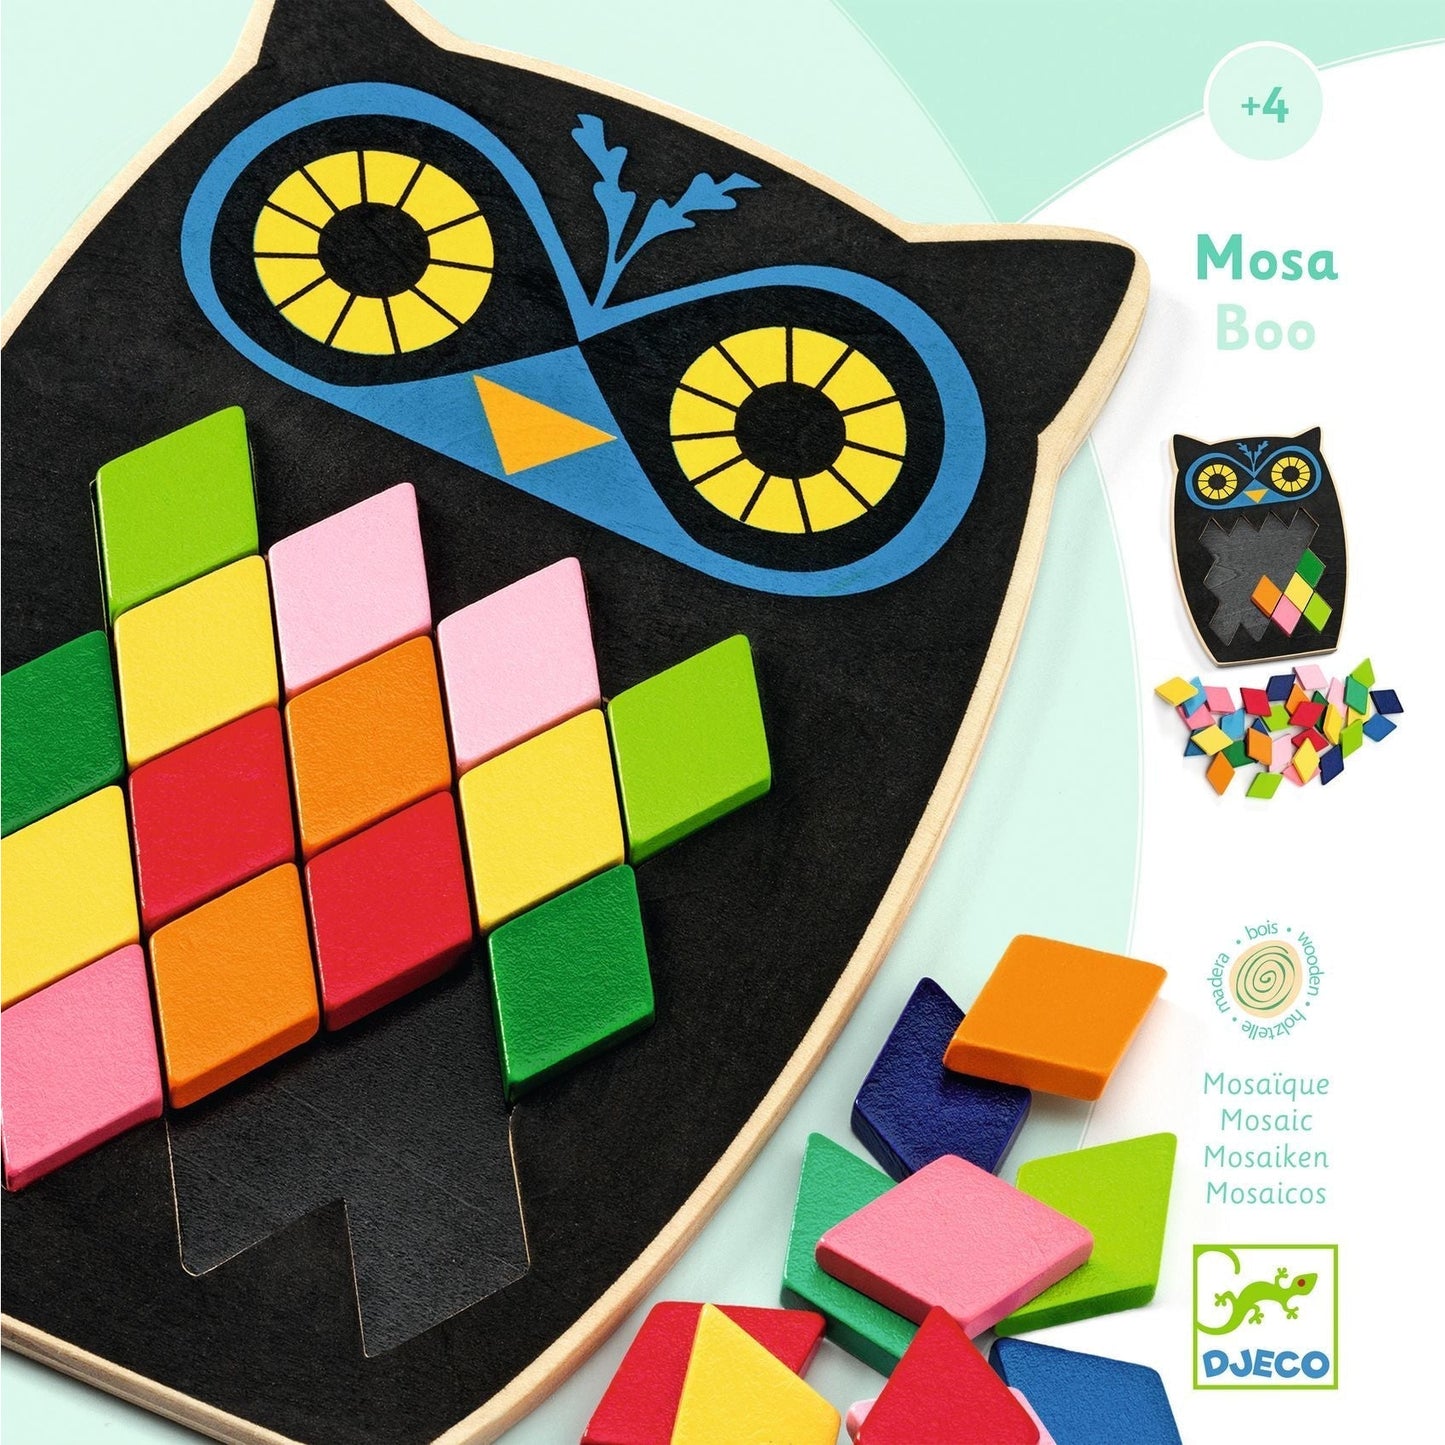 Mosa Boo - Educational Wooden Game